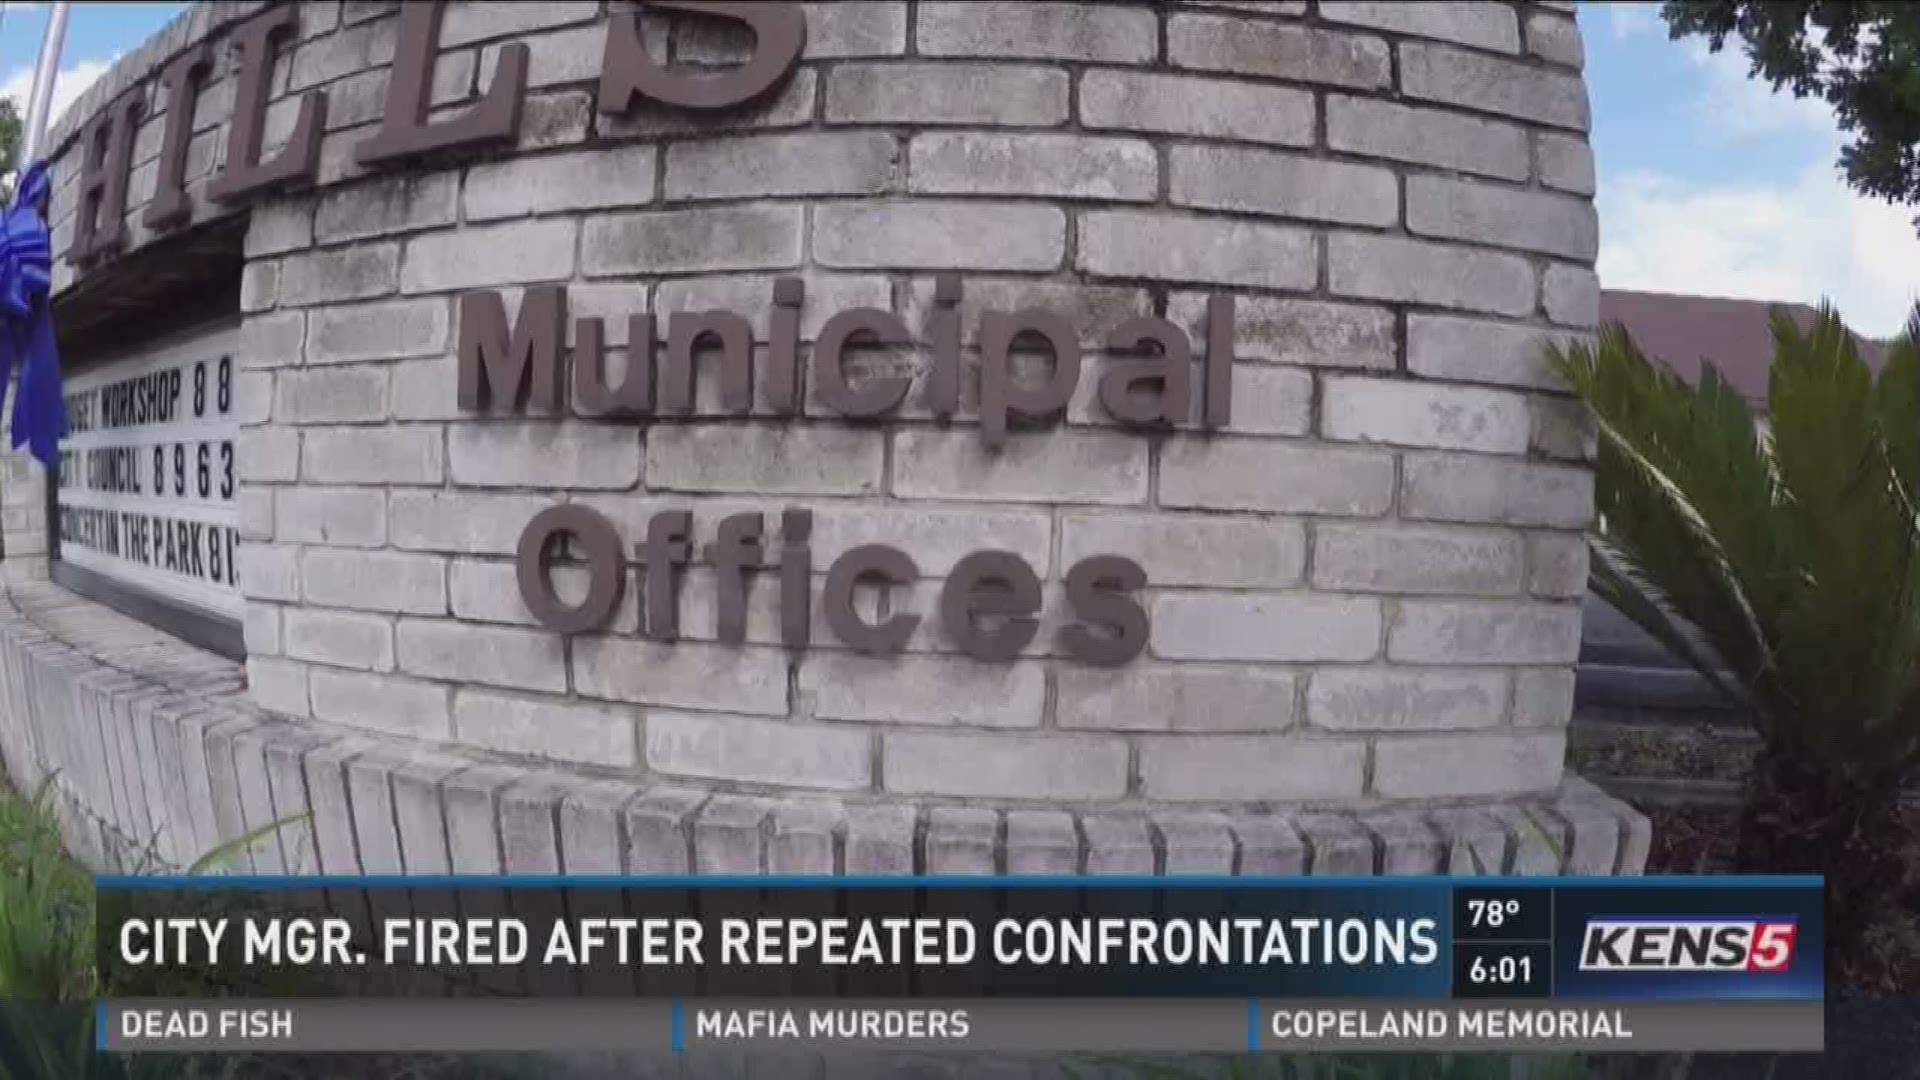 City MGR. fired after repeated confrontations